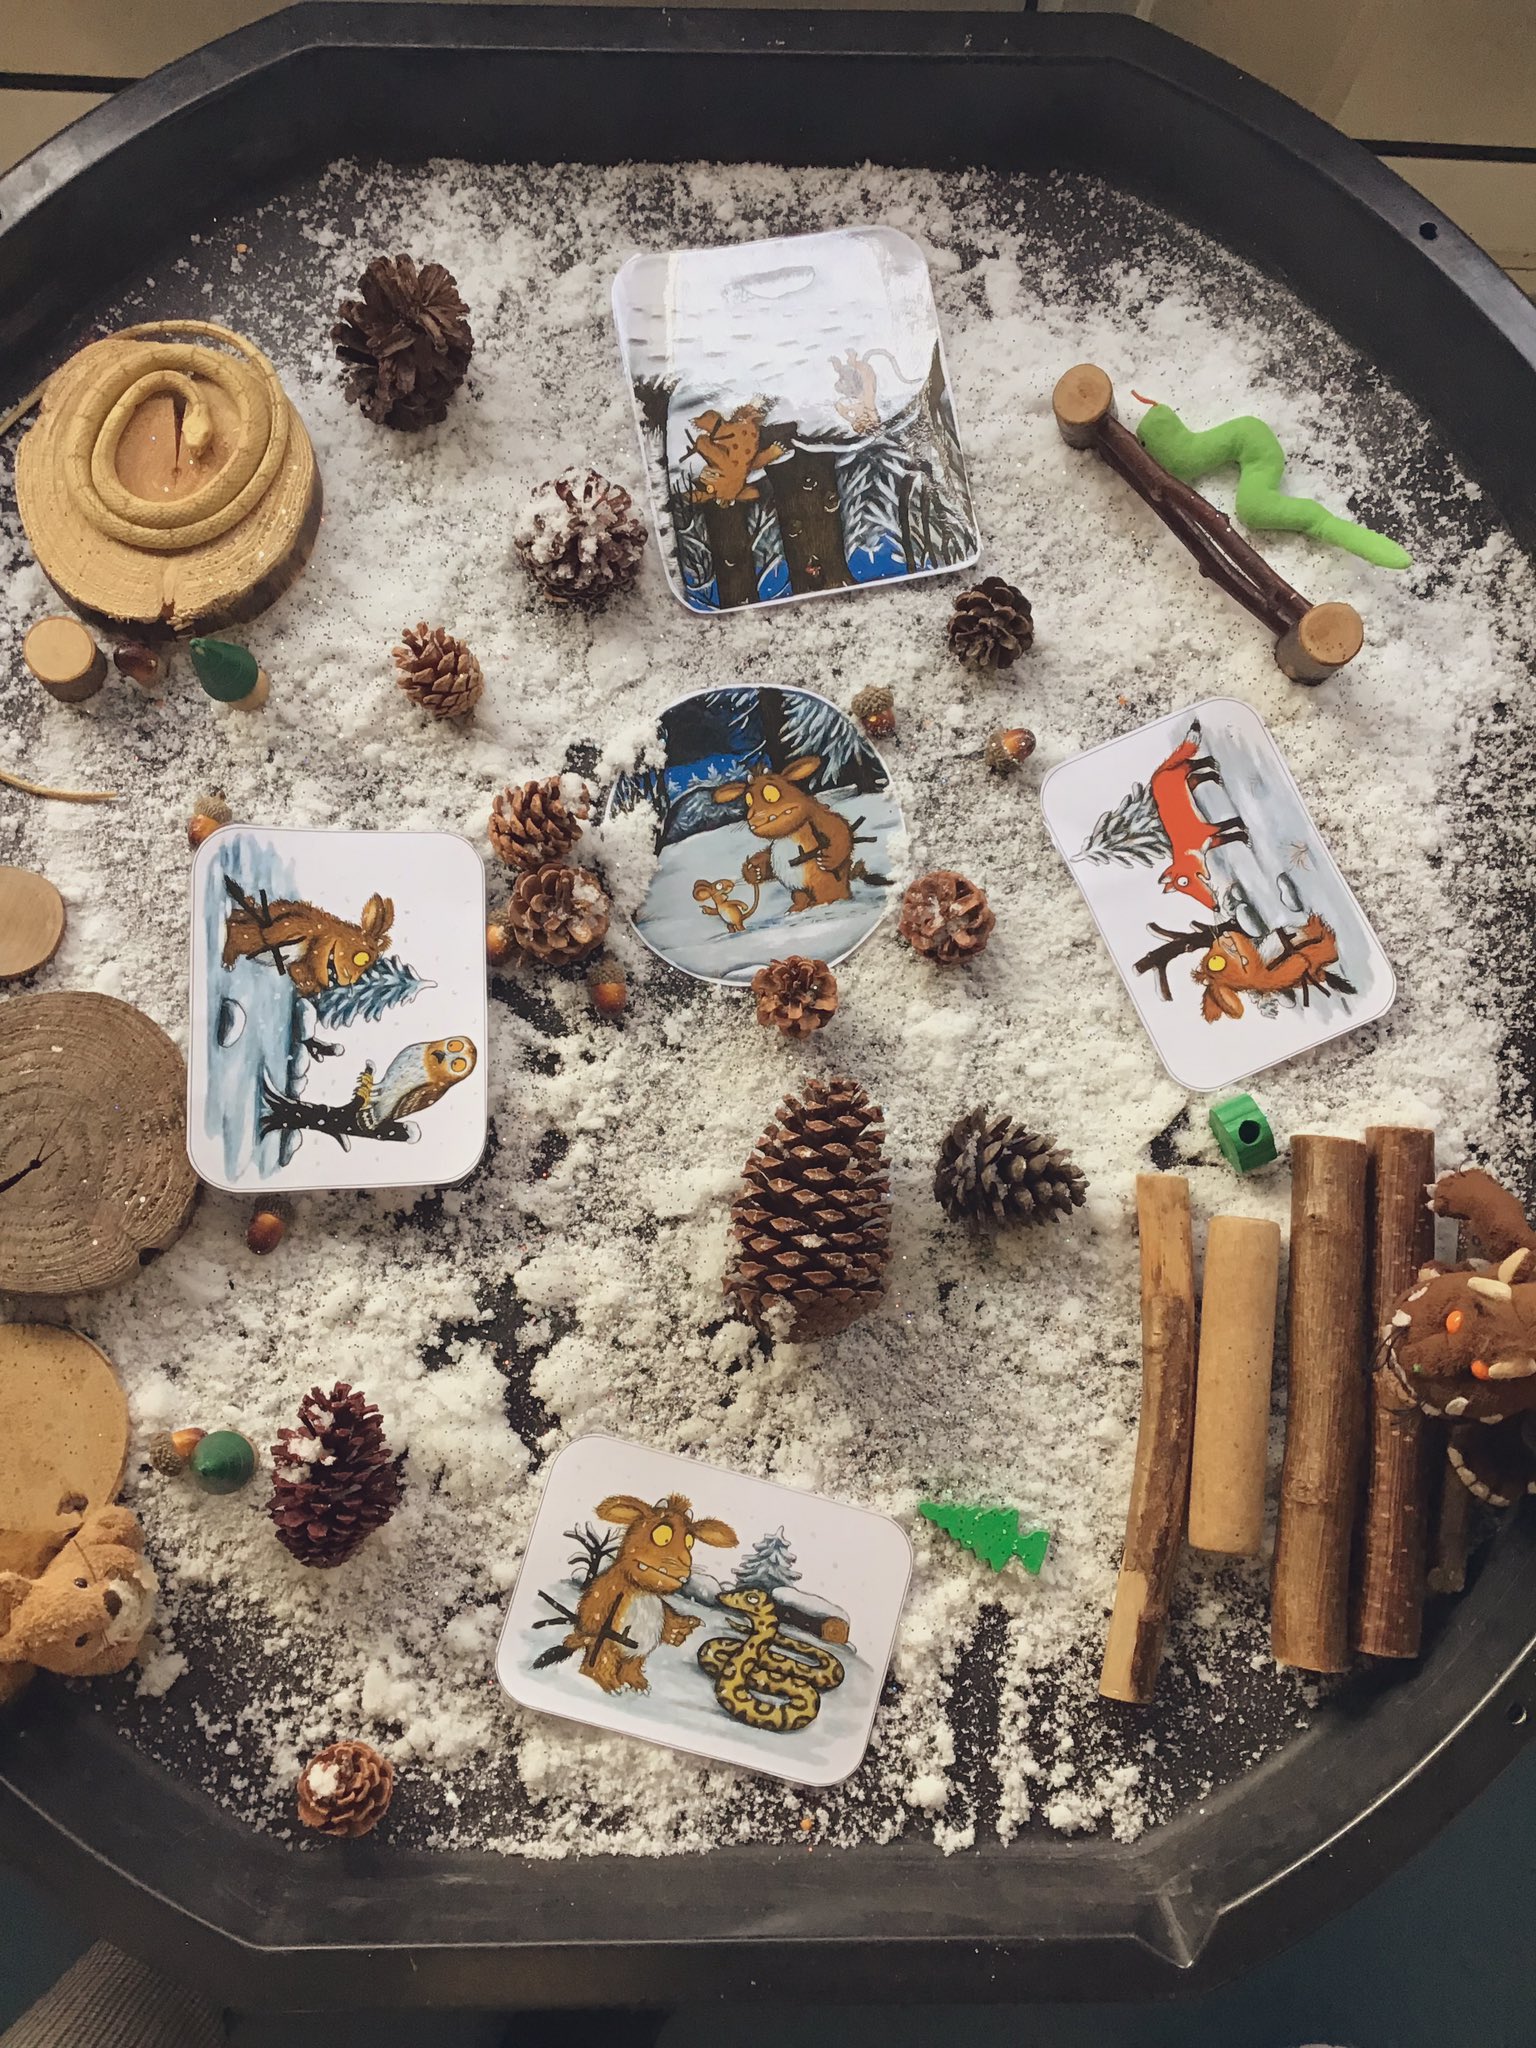 EYFS - Miss Hulme on X: A snapshot of our lovely Gruffalo tuff tray. And a  snapshot of the messy fun the children are having in it! #EYFS  #TuffTrayReality #TuffTrayFun  /